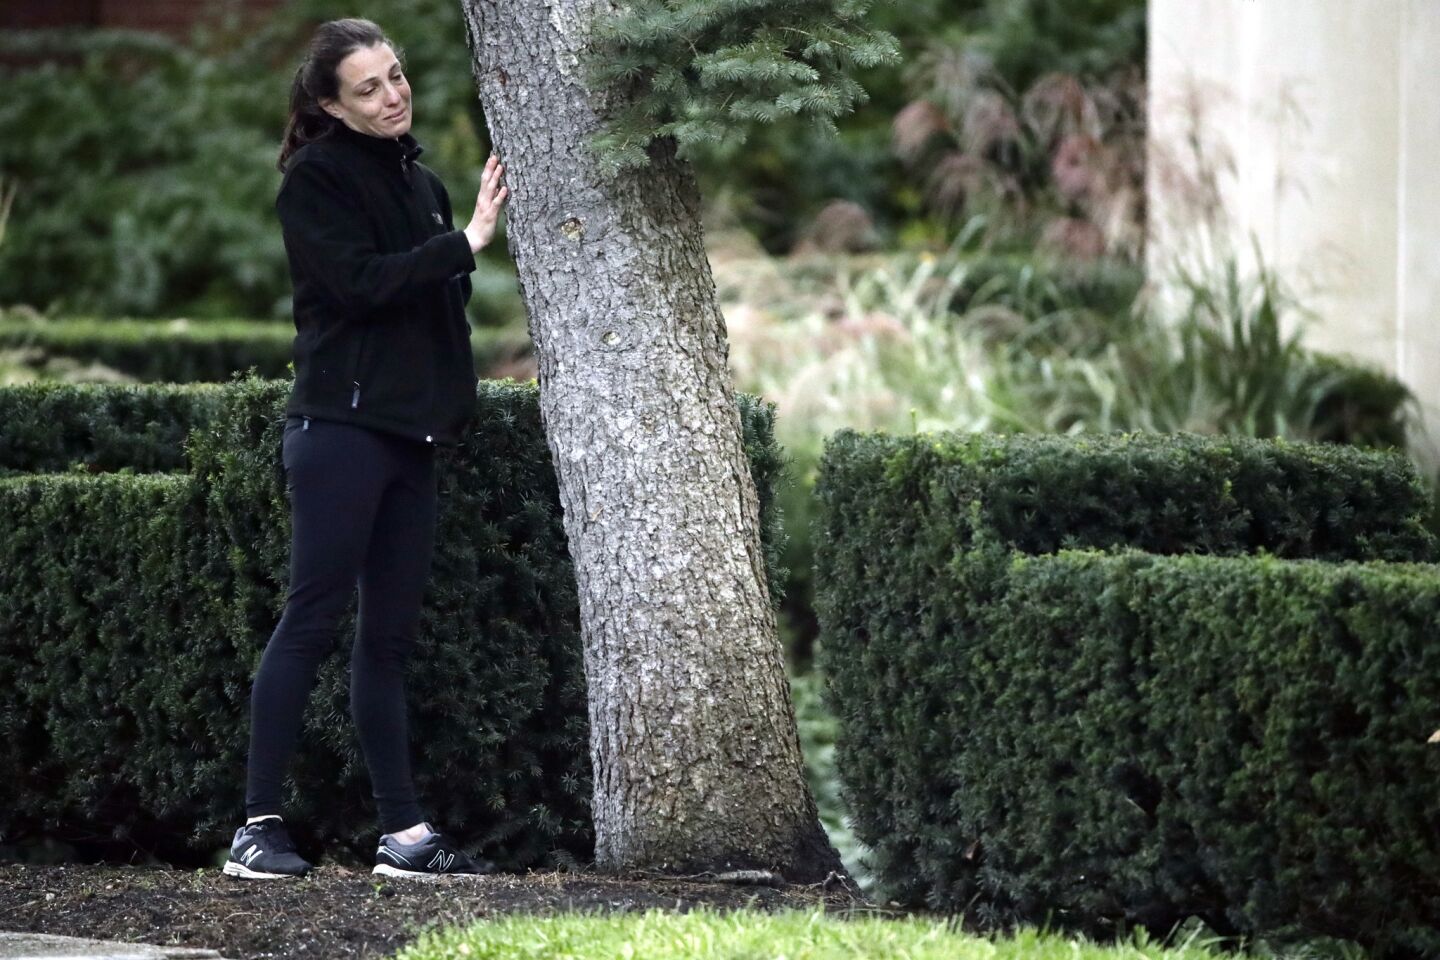 A woman touches a tree as she pauses near a memorial in front at the Tree of Life Synagogue in Pittsburgh, Monday, Oct. 29, 2018. Tree of Life shooting suspect Robert Gregory Bowers is expected to appear in federal court Monday. Authorities say he expressed hatred toward Jews during the rampage Saturday and in later comments to police.